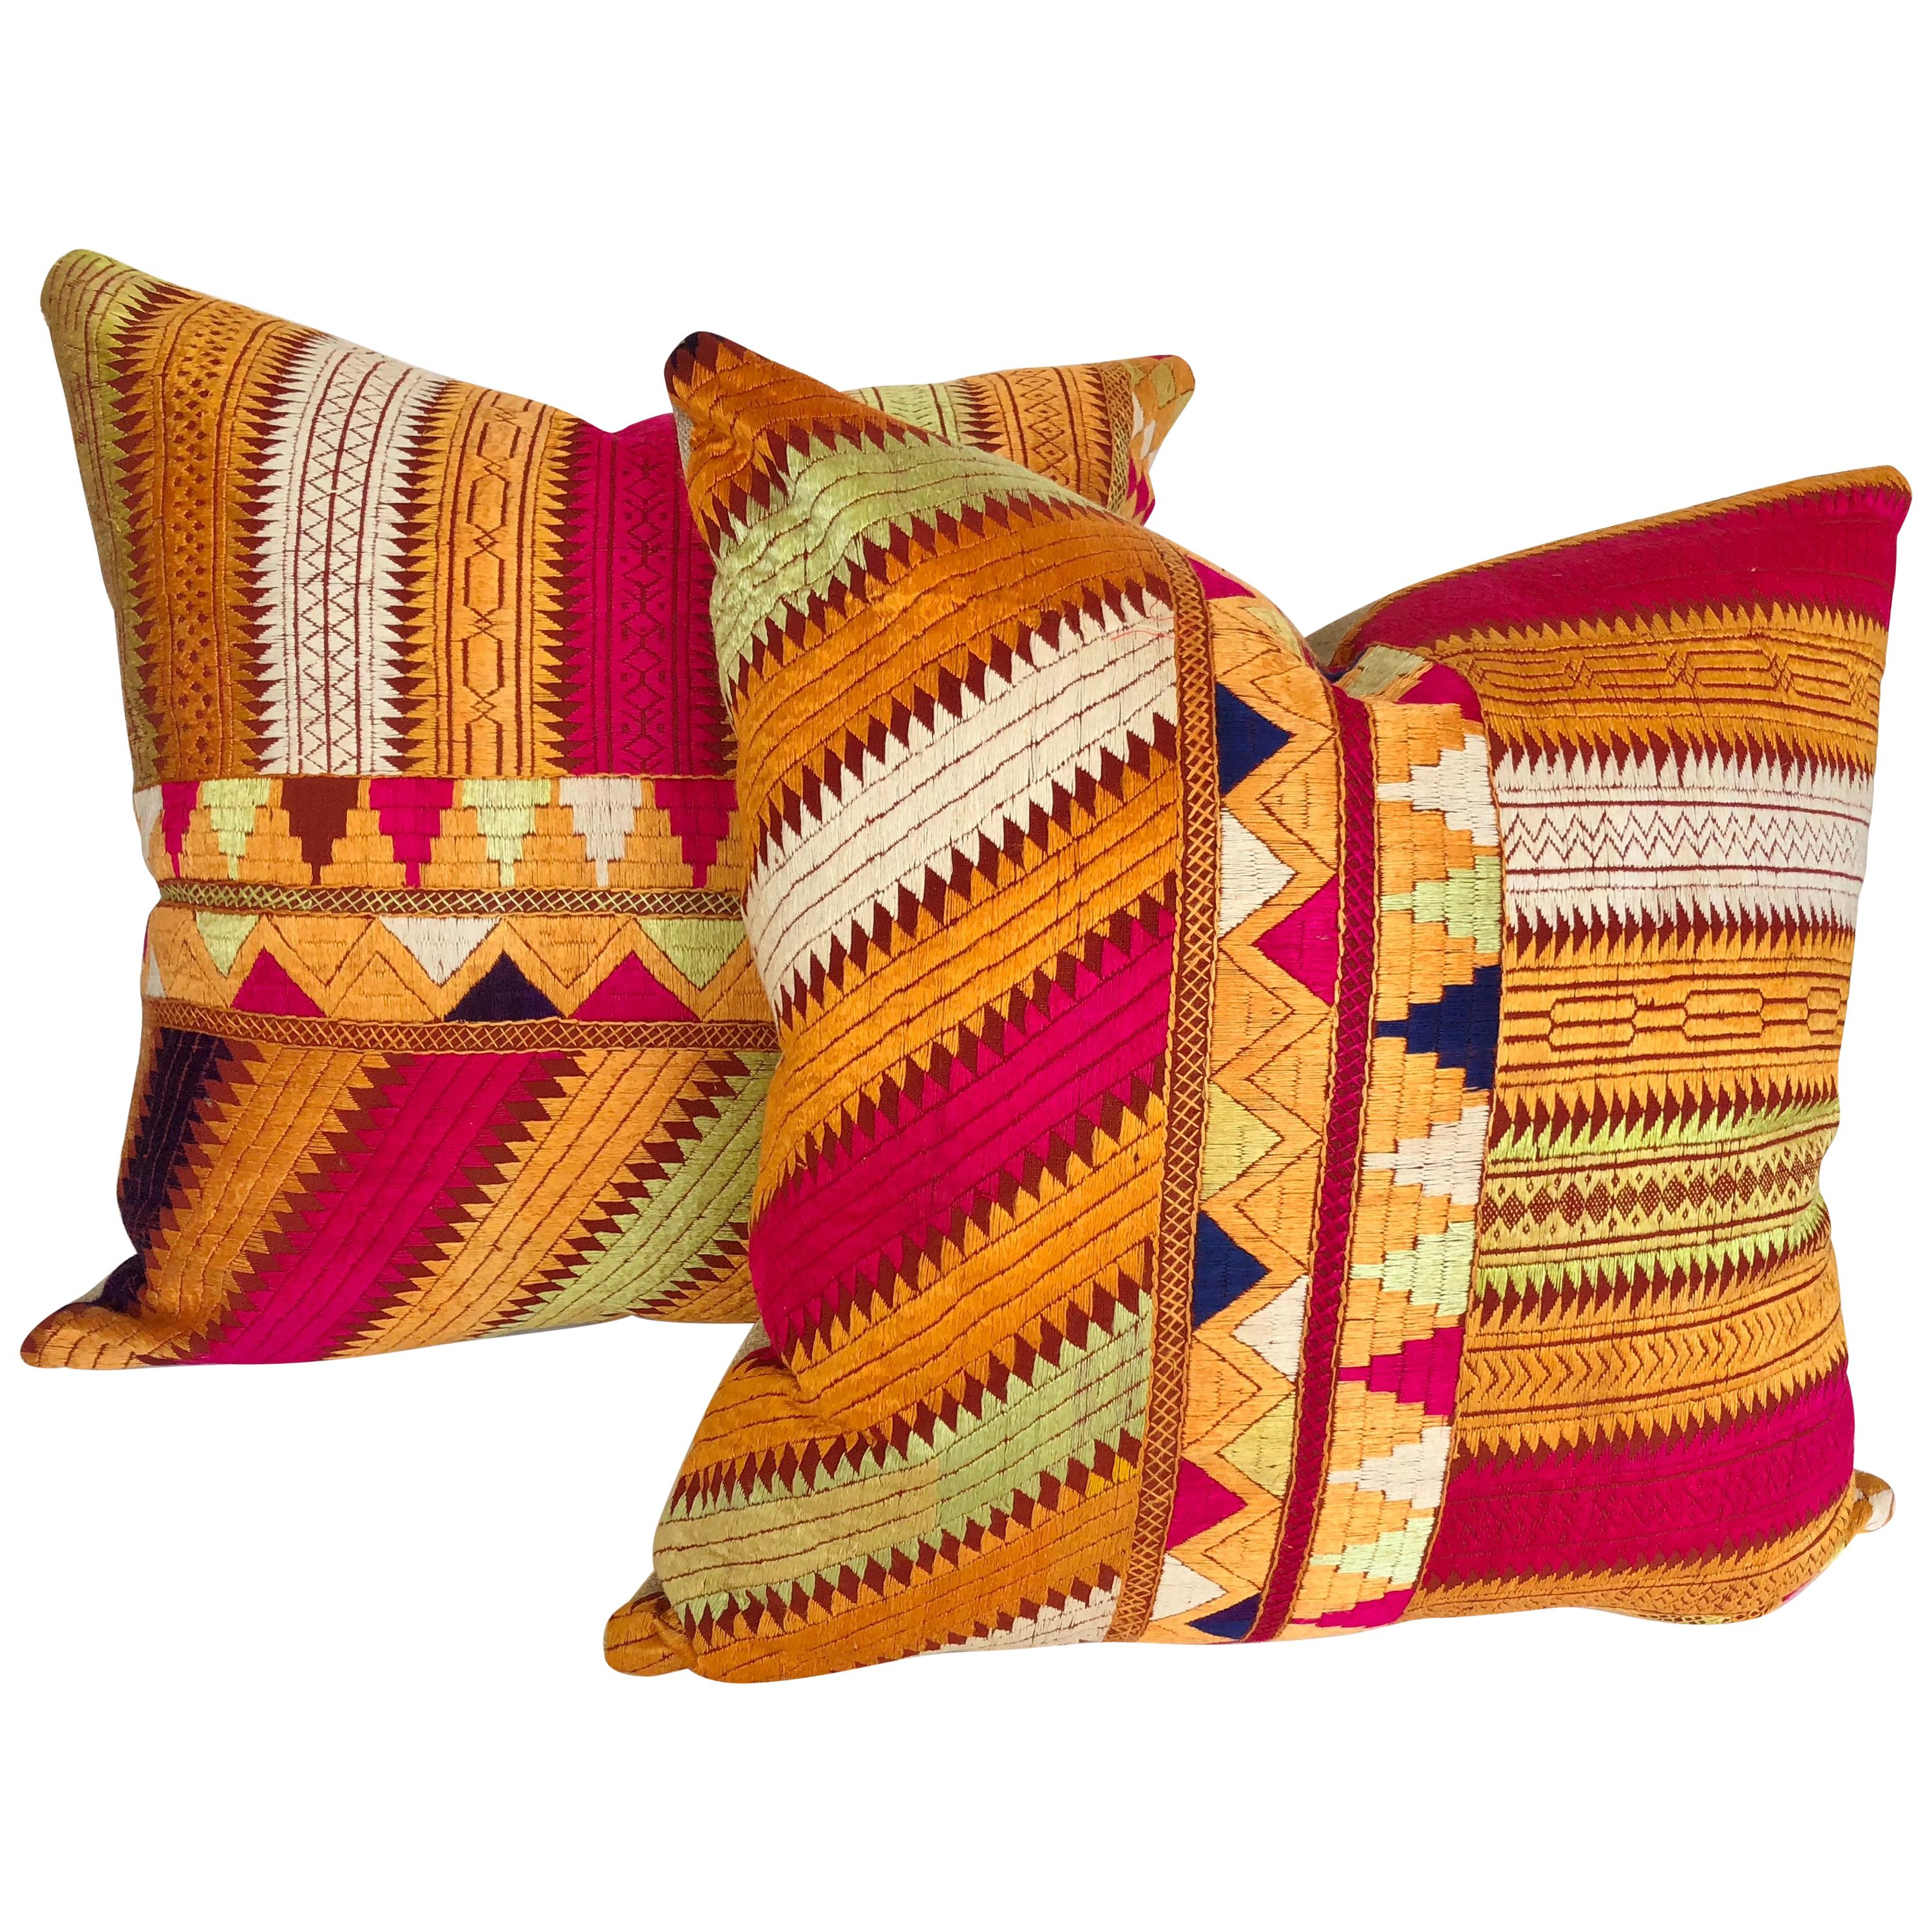 Custom Pillows by Maison Suzanne Cut from a Vintage Silk Embroidered Phulkari